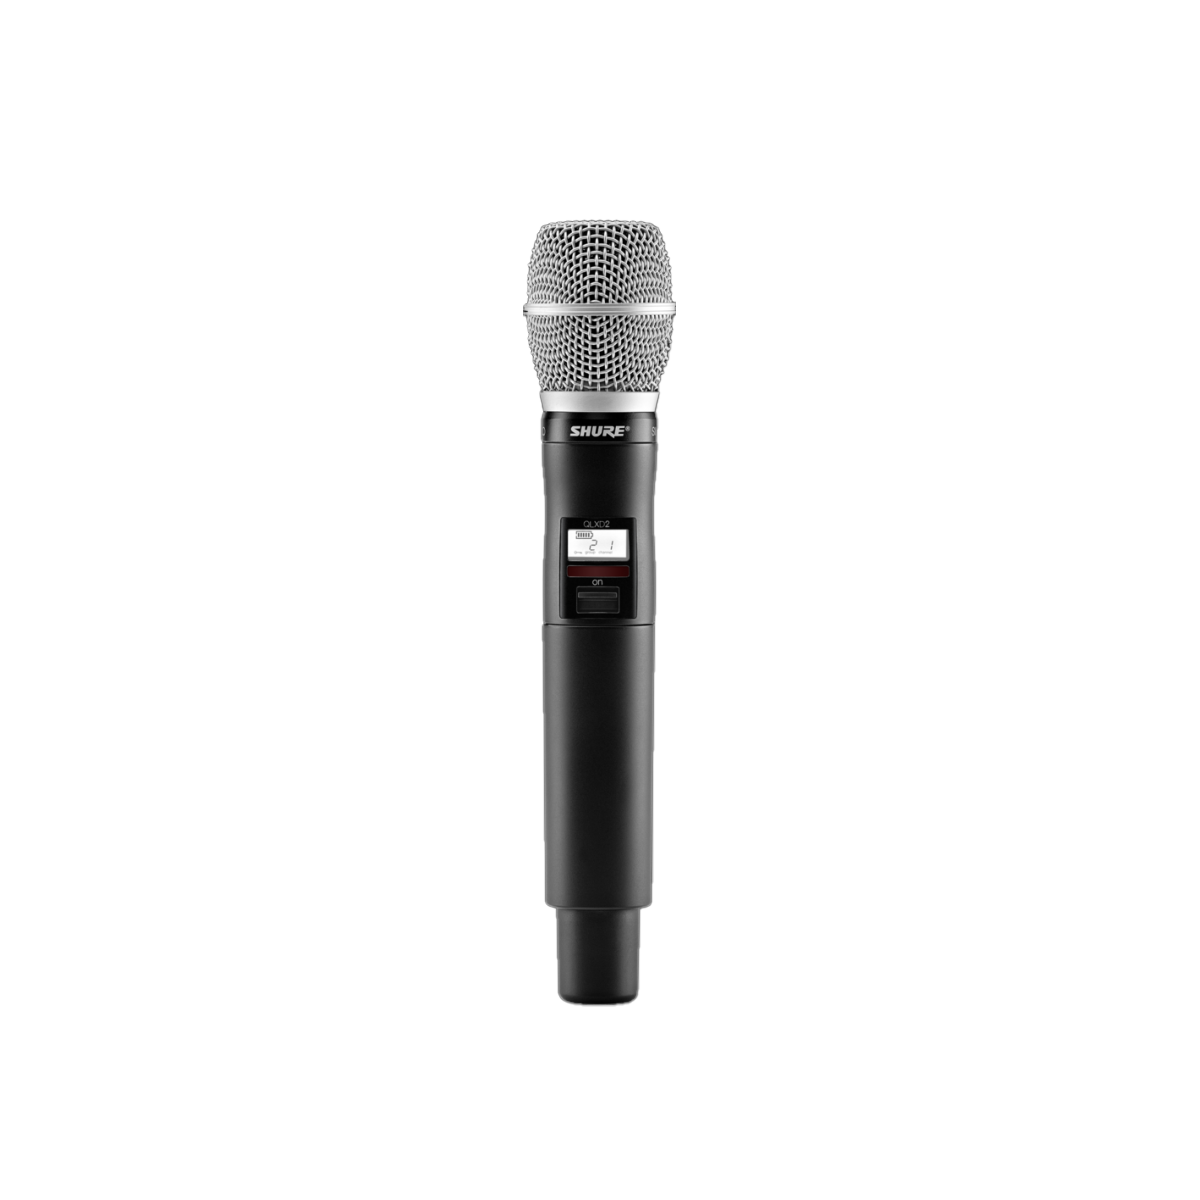 QLXD2/SM86=-J50A Handheld Transmitter with SM86 Microphone